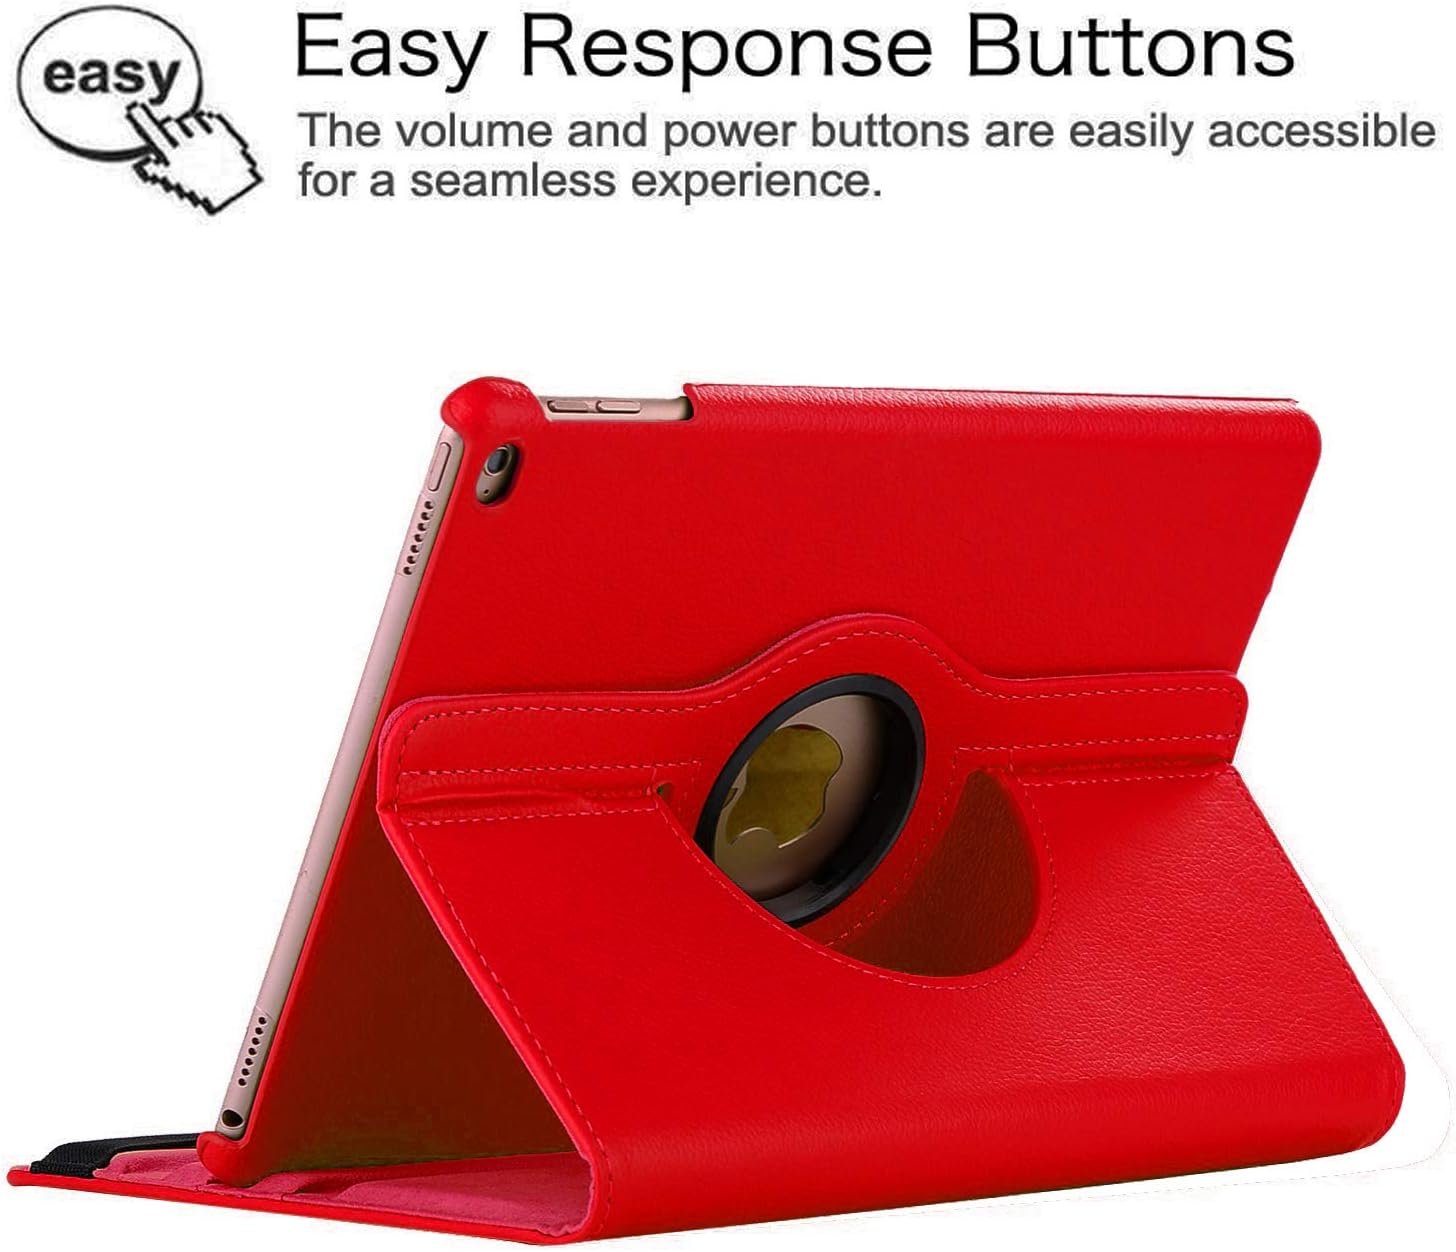 Kickstand Book Case for iPad 4/3/2 - Red *Free Shipping*